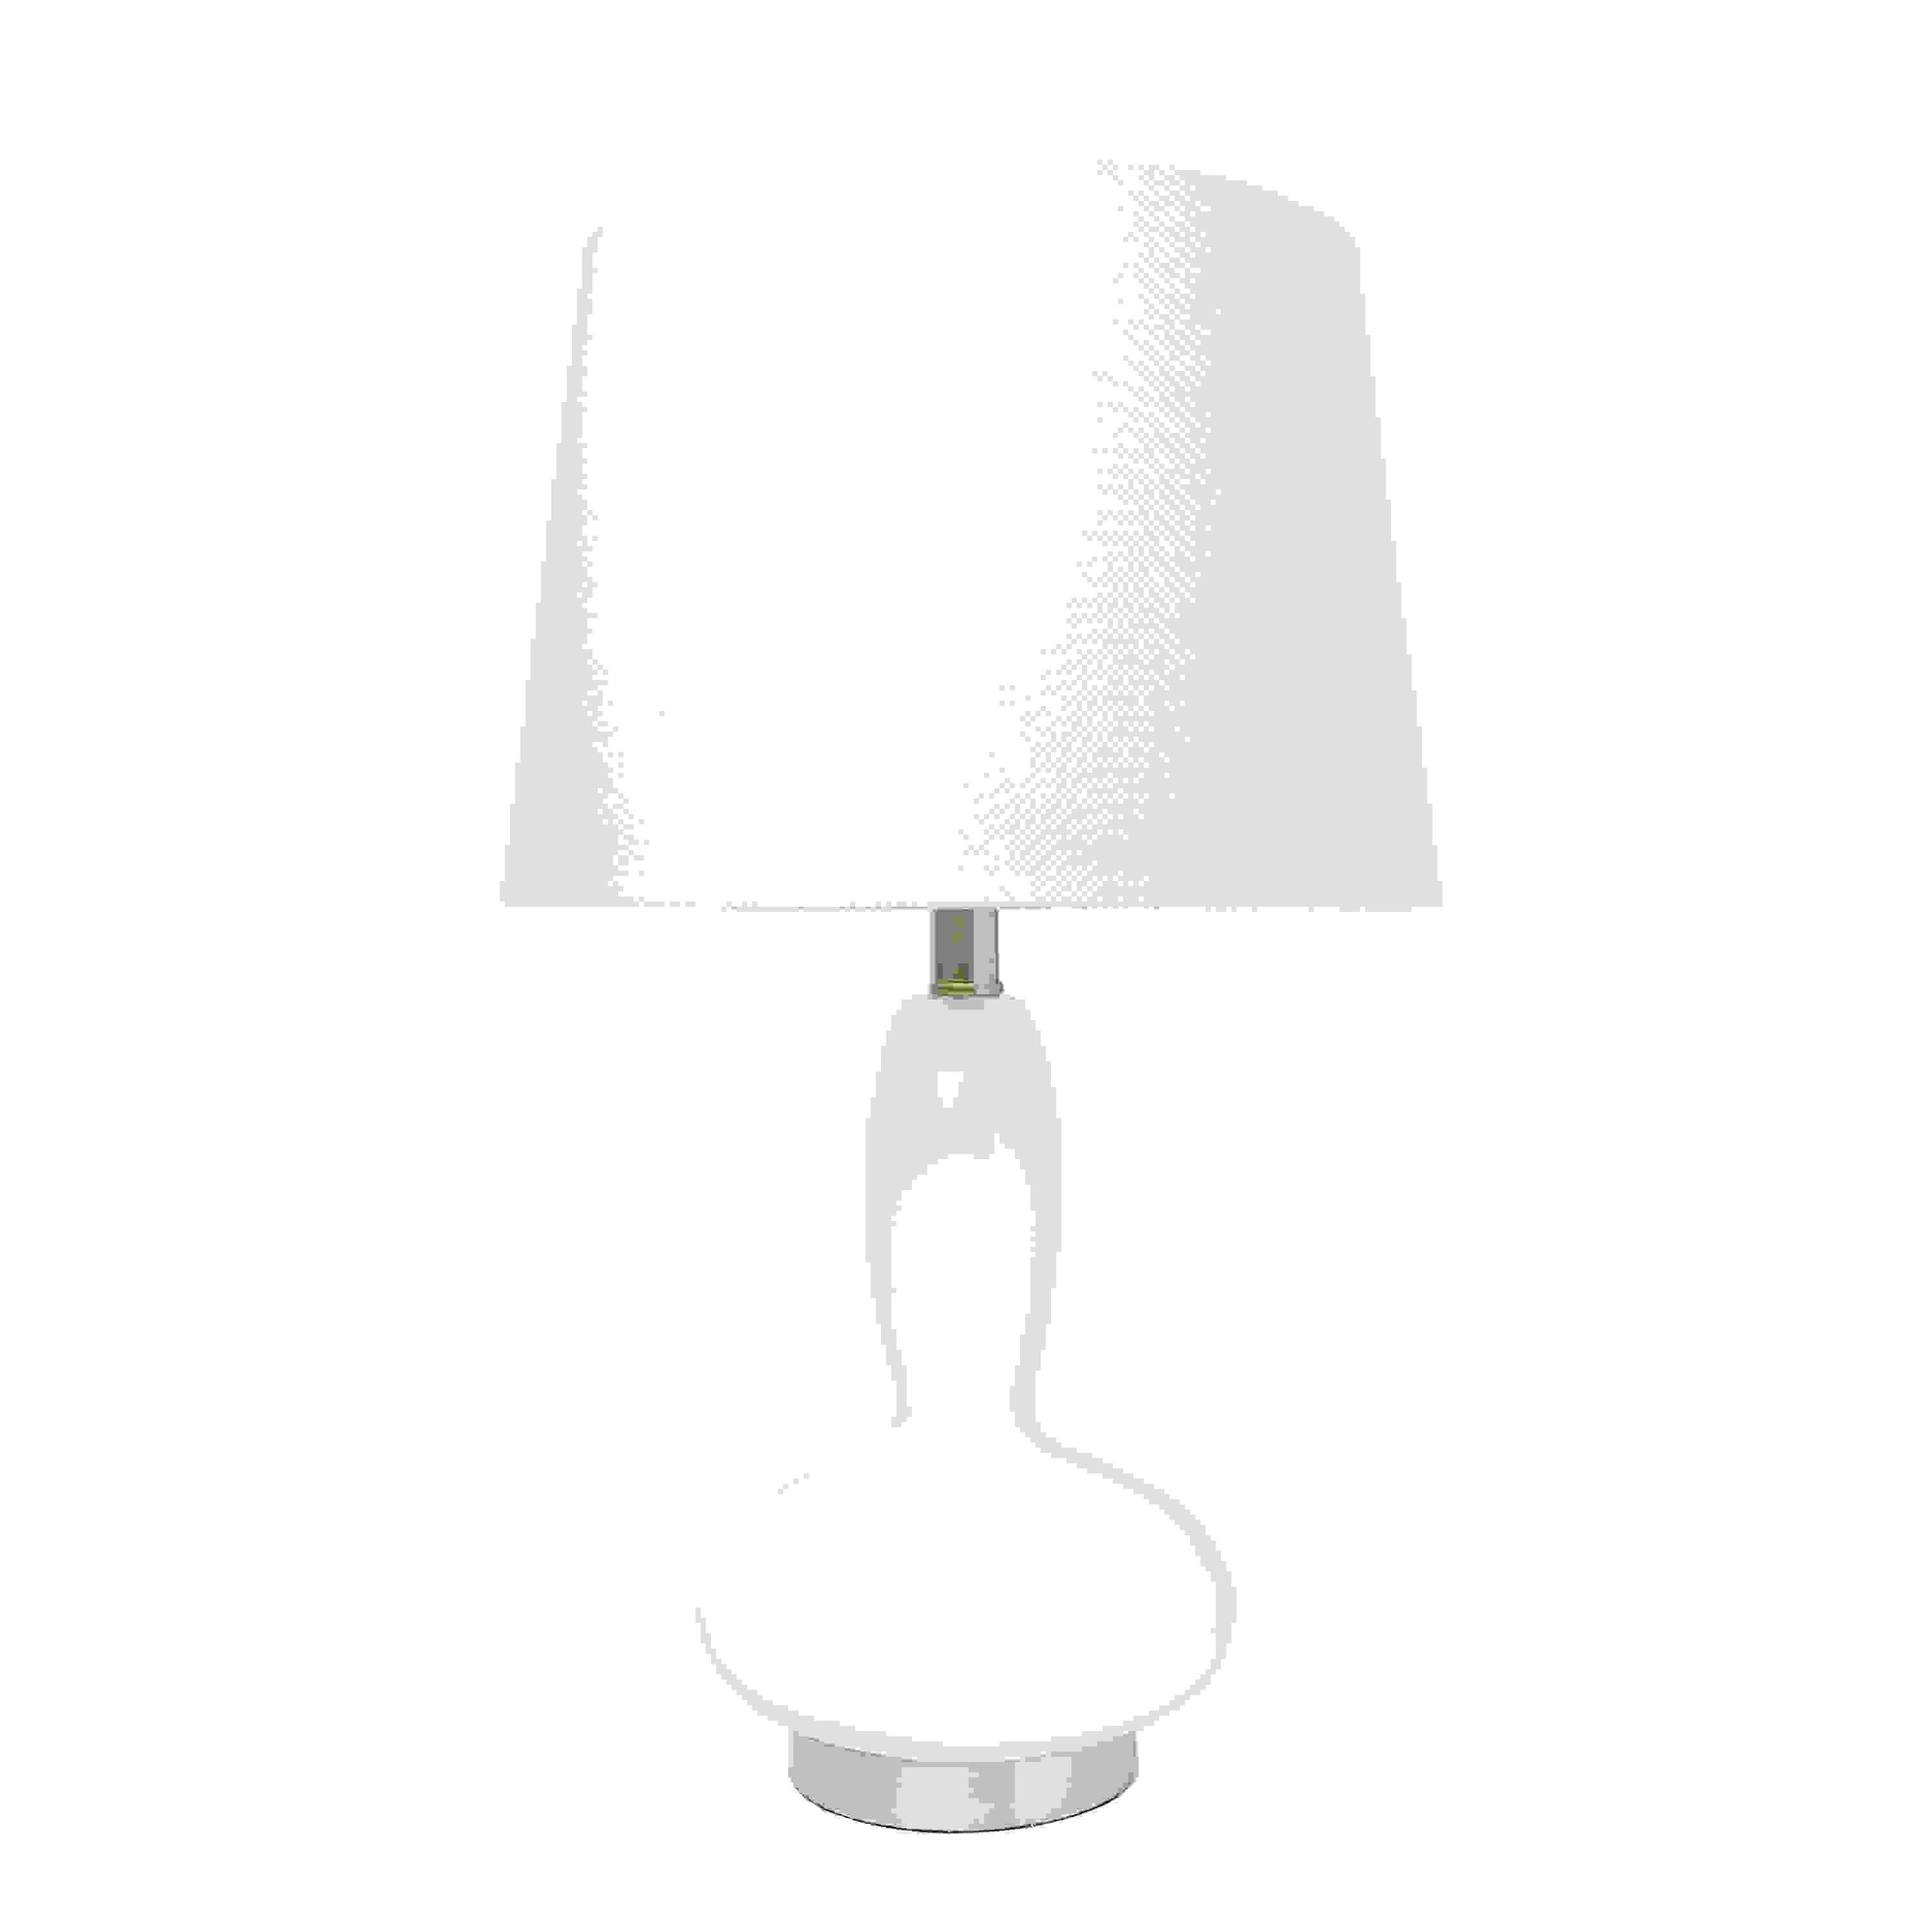  Lalia Home Glass Dollop Table Lamp with White Fabric Shade, White